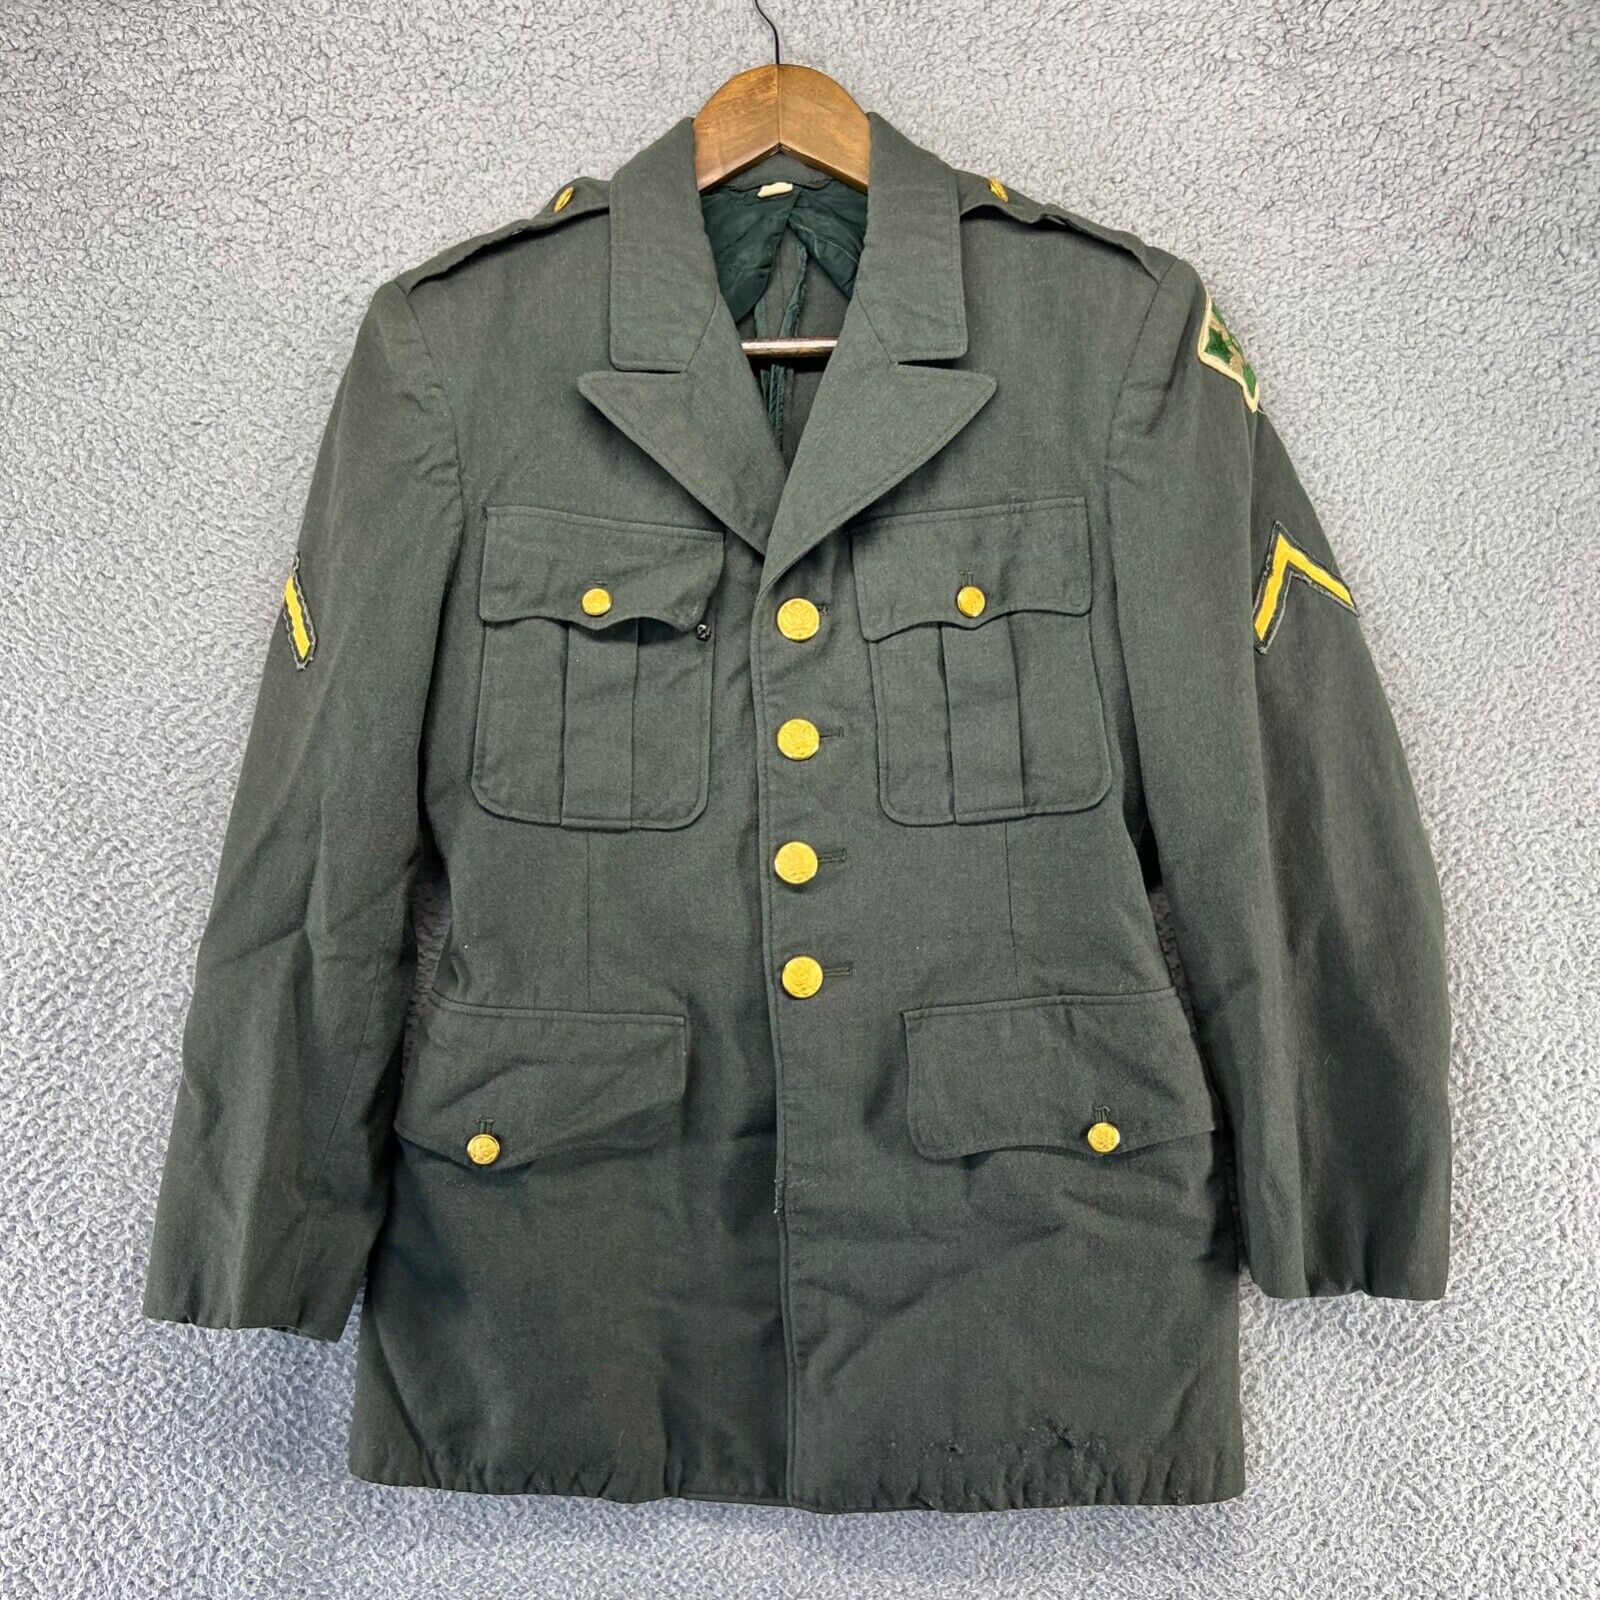 Vintage 50s Military Blazer Jacket Adult 36 S Green Patches Wool Army Franklin